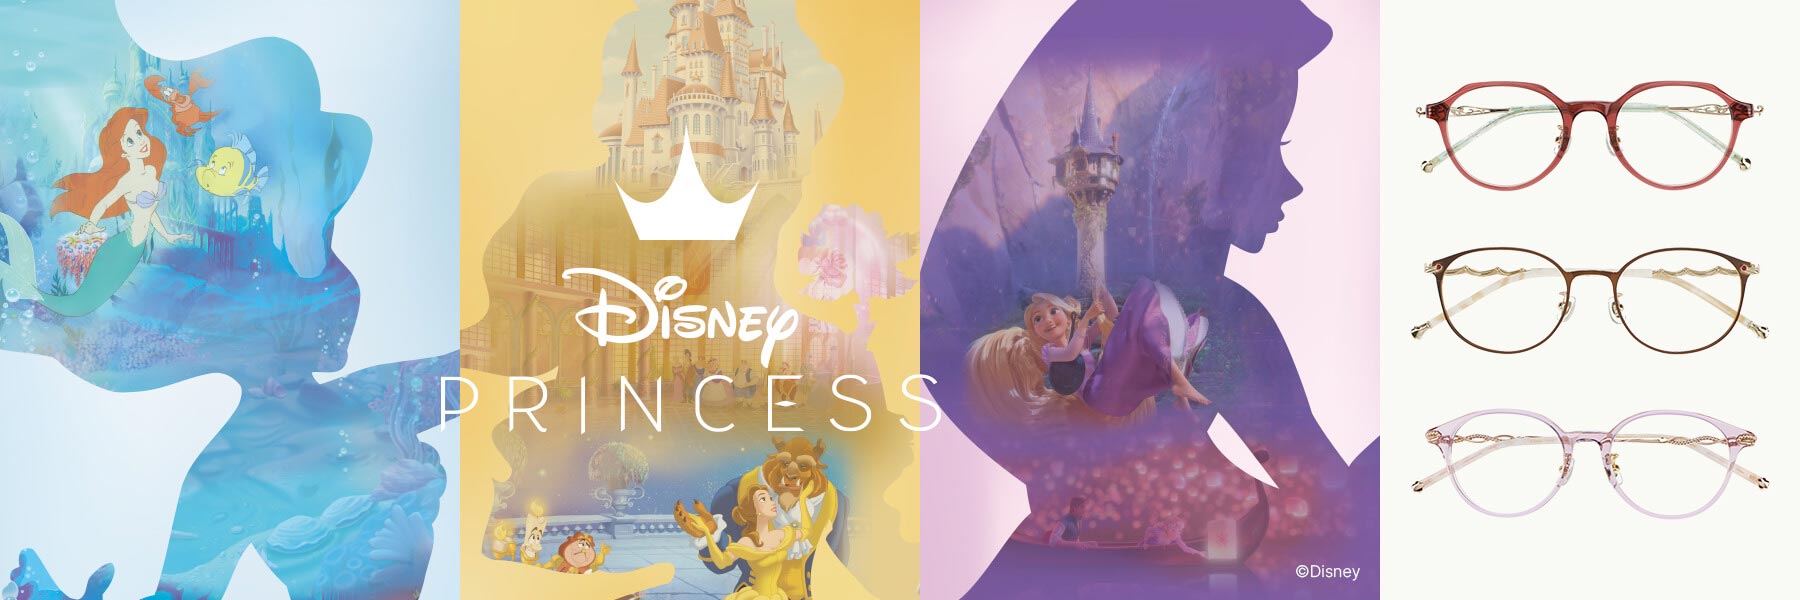 Disney Collection created by Zoff "PRINCESS"